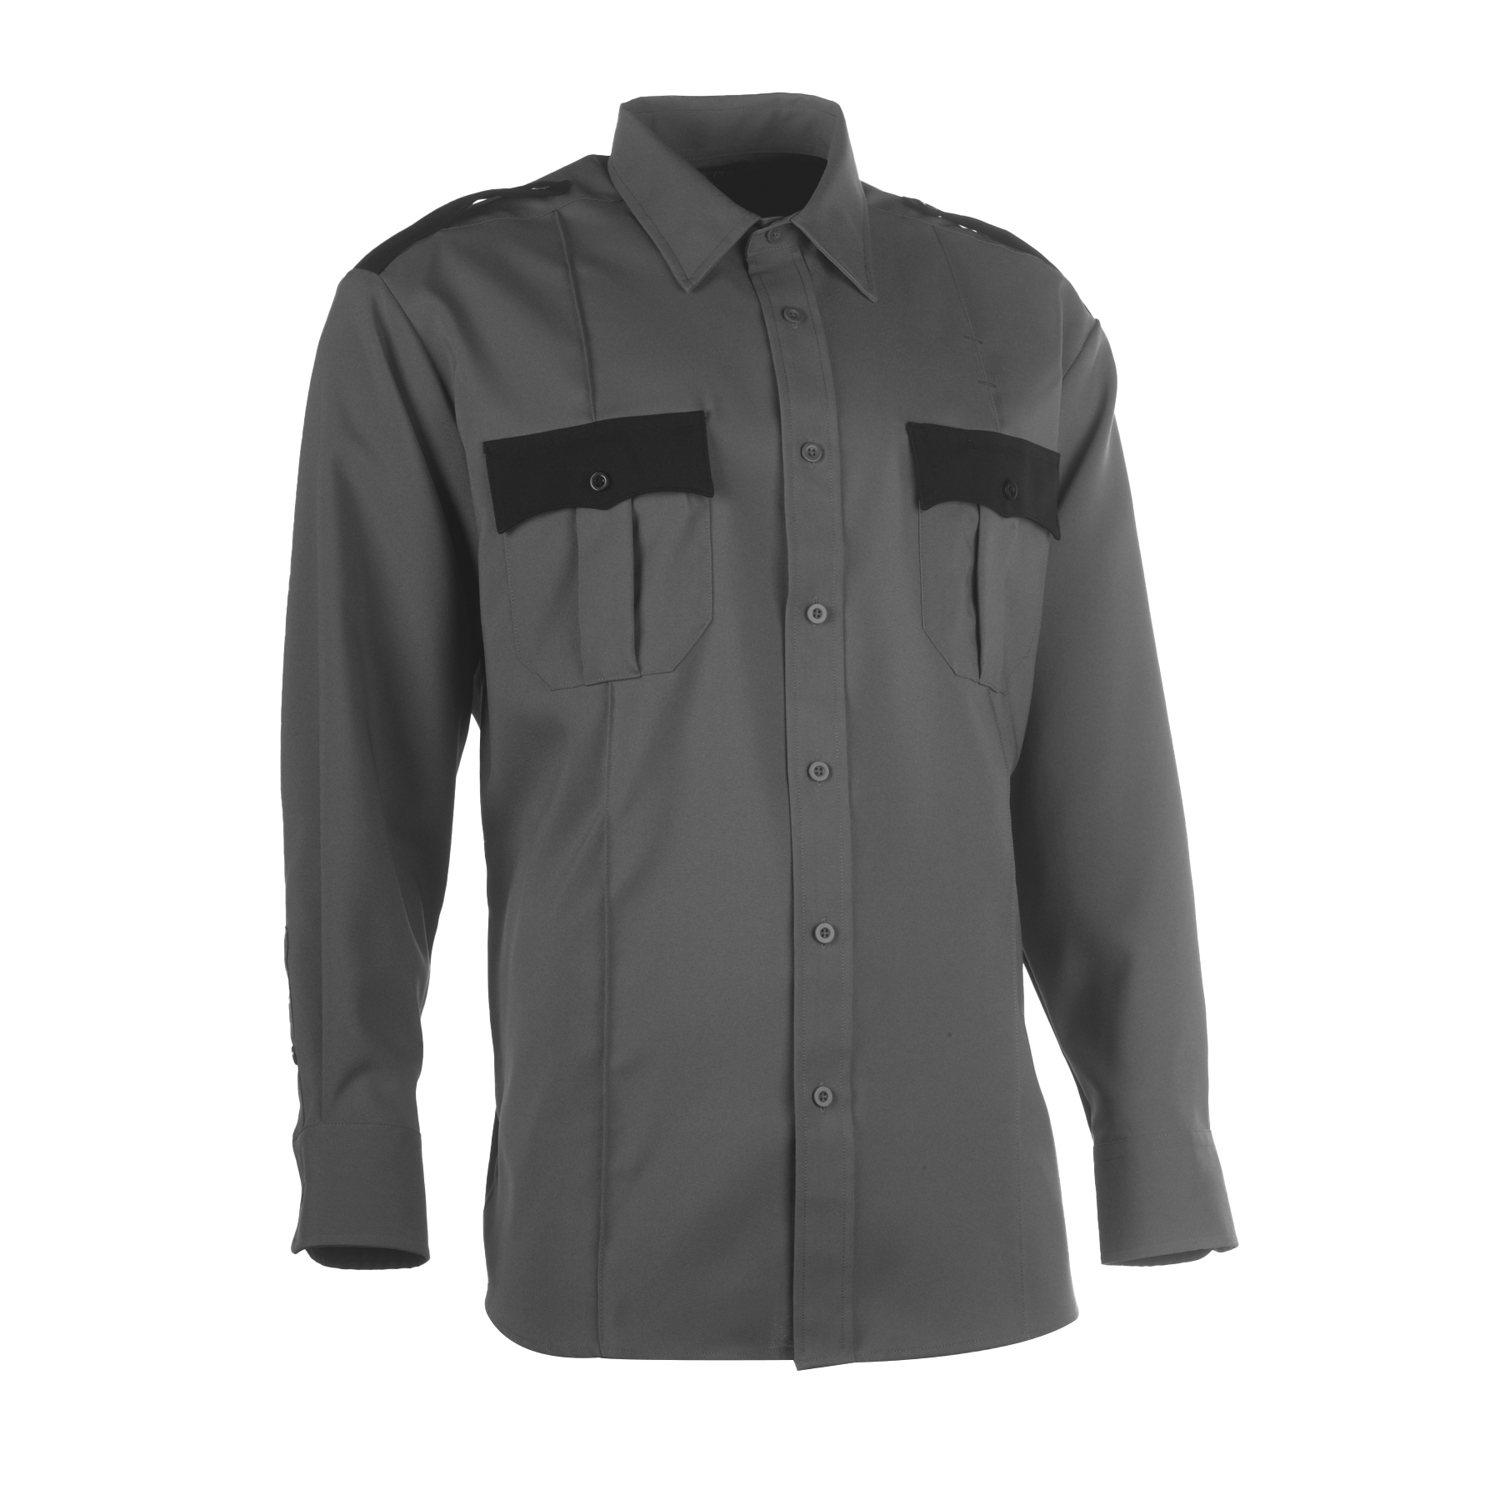 LAWPRO+ UNISEX TWO-TONE POLYESTER LONG SLEEVE SHIRT